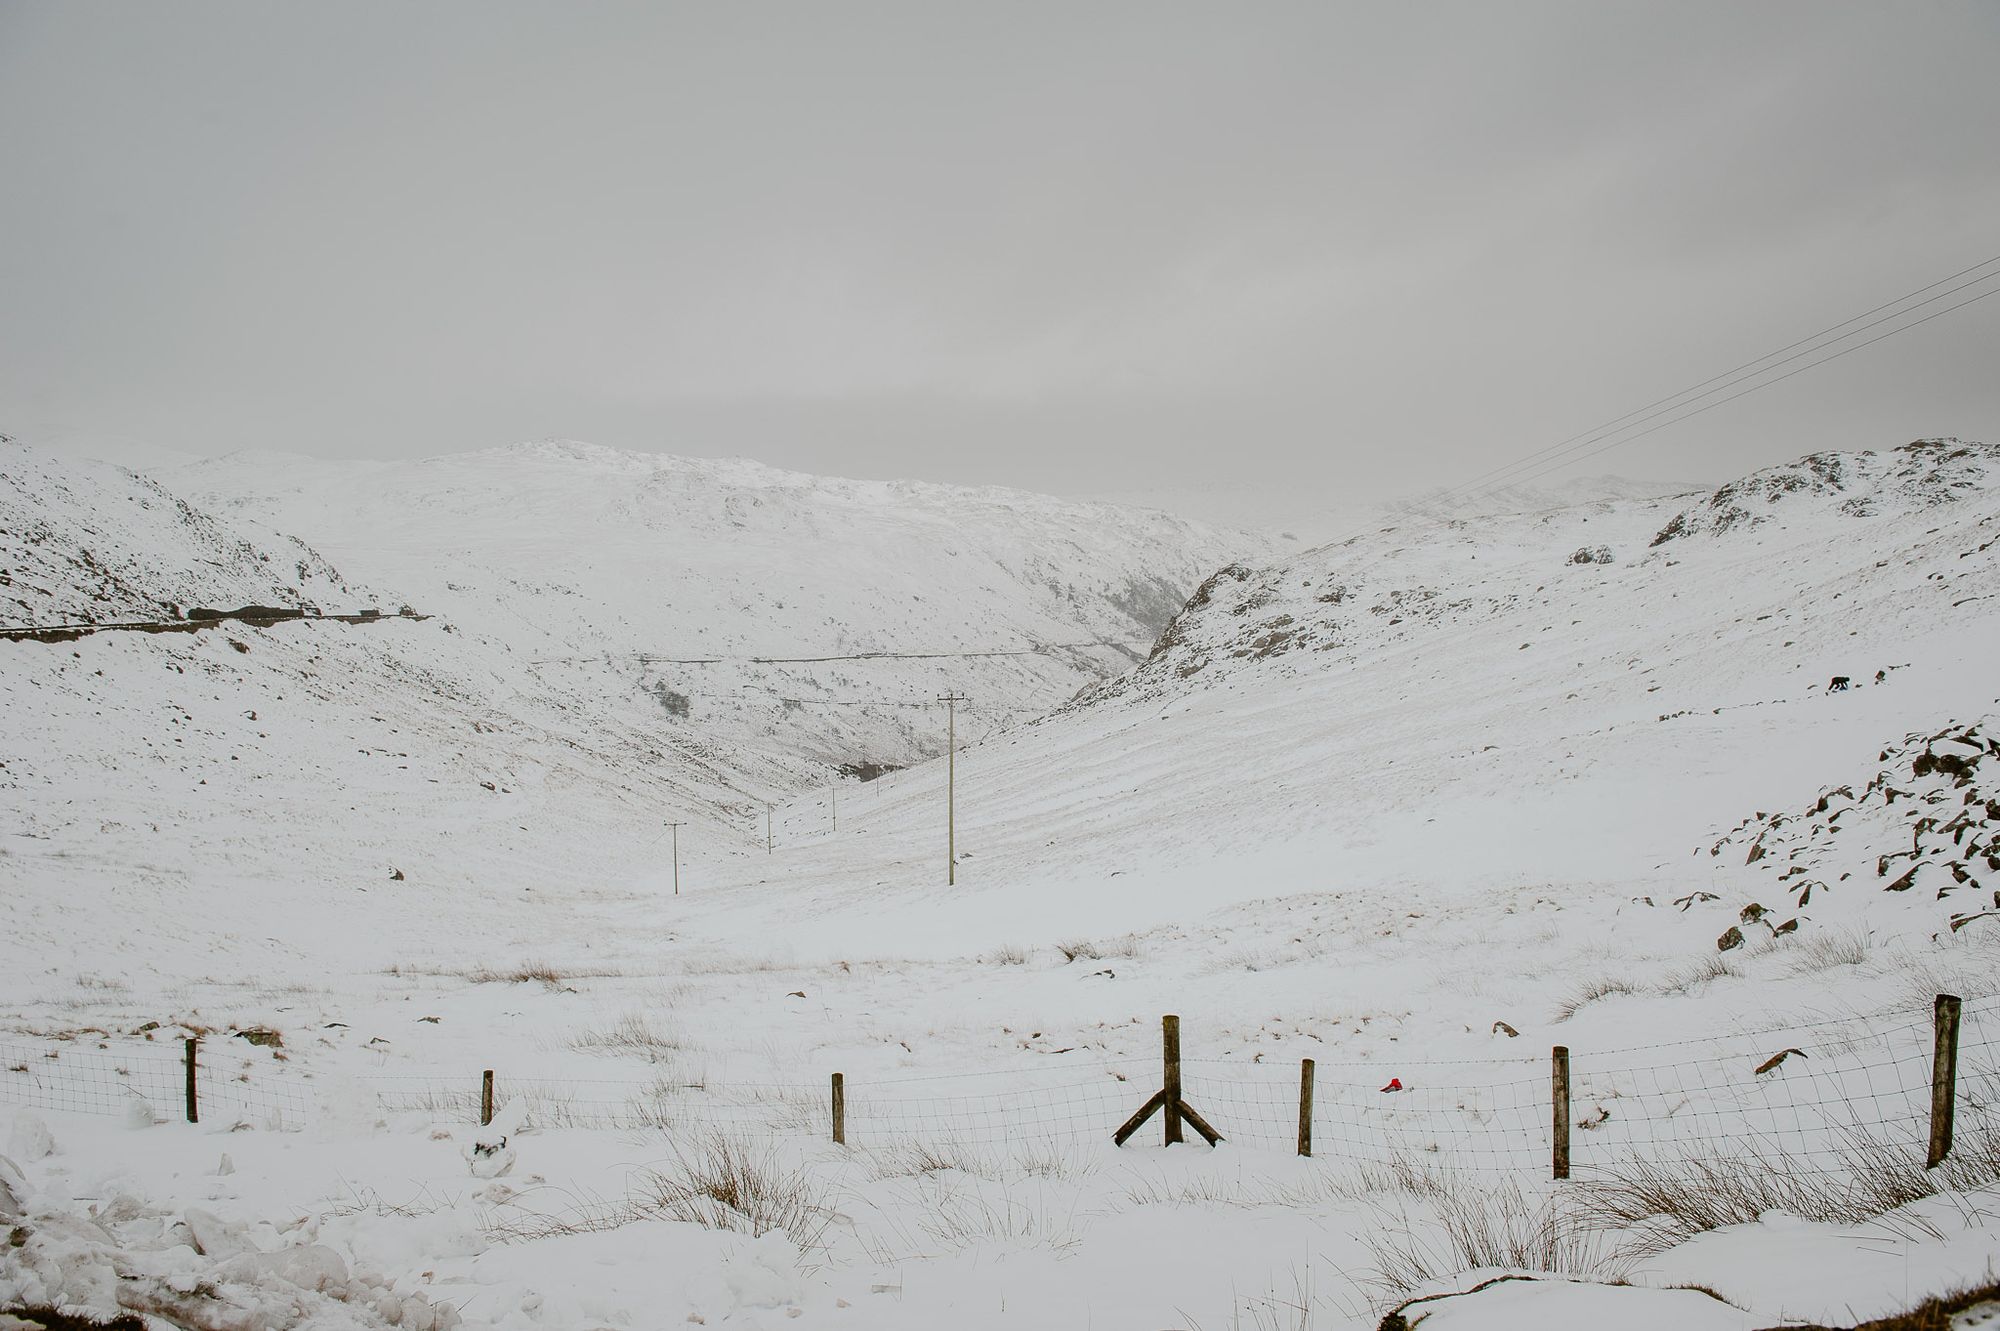 Snowy hills. There are telegraph poles leading down the hills.